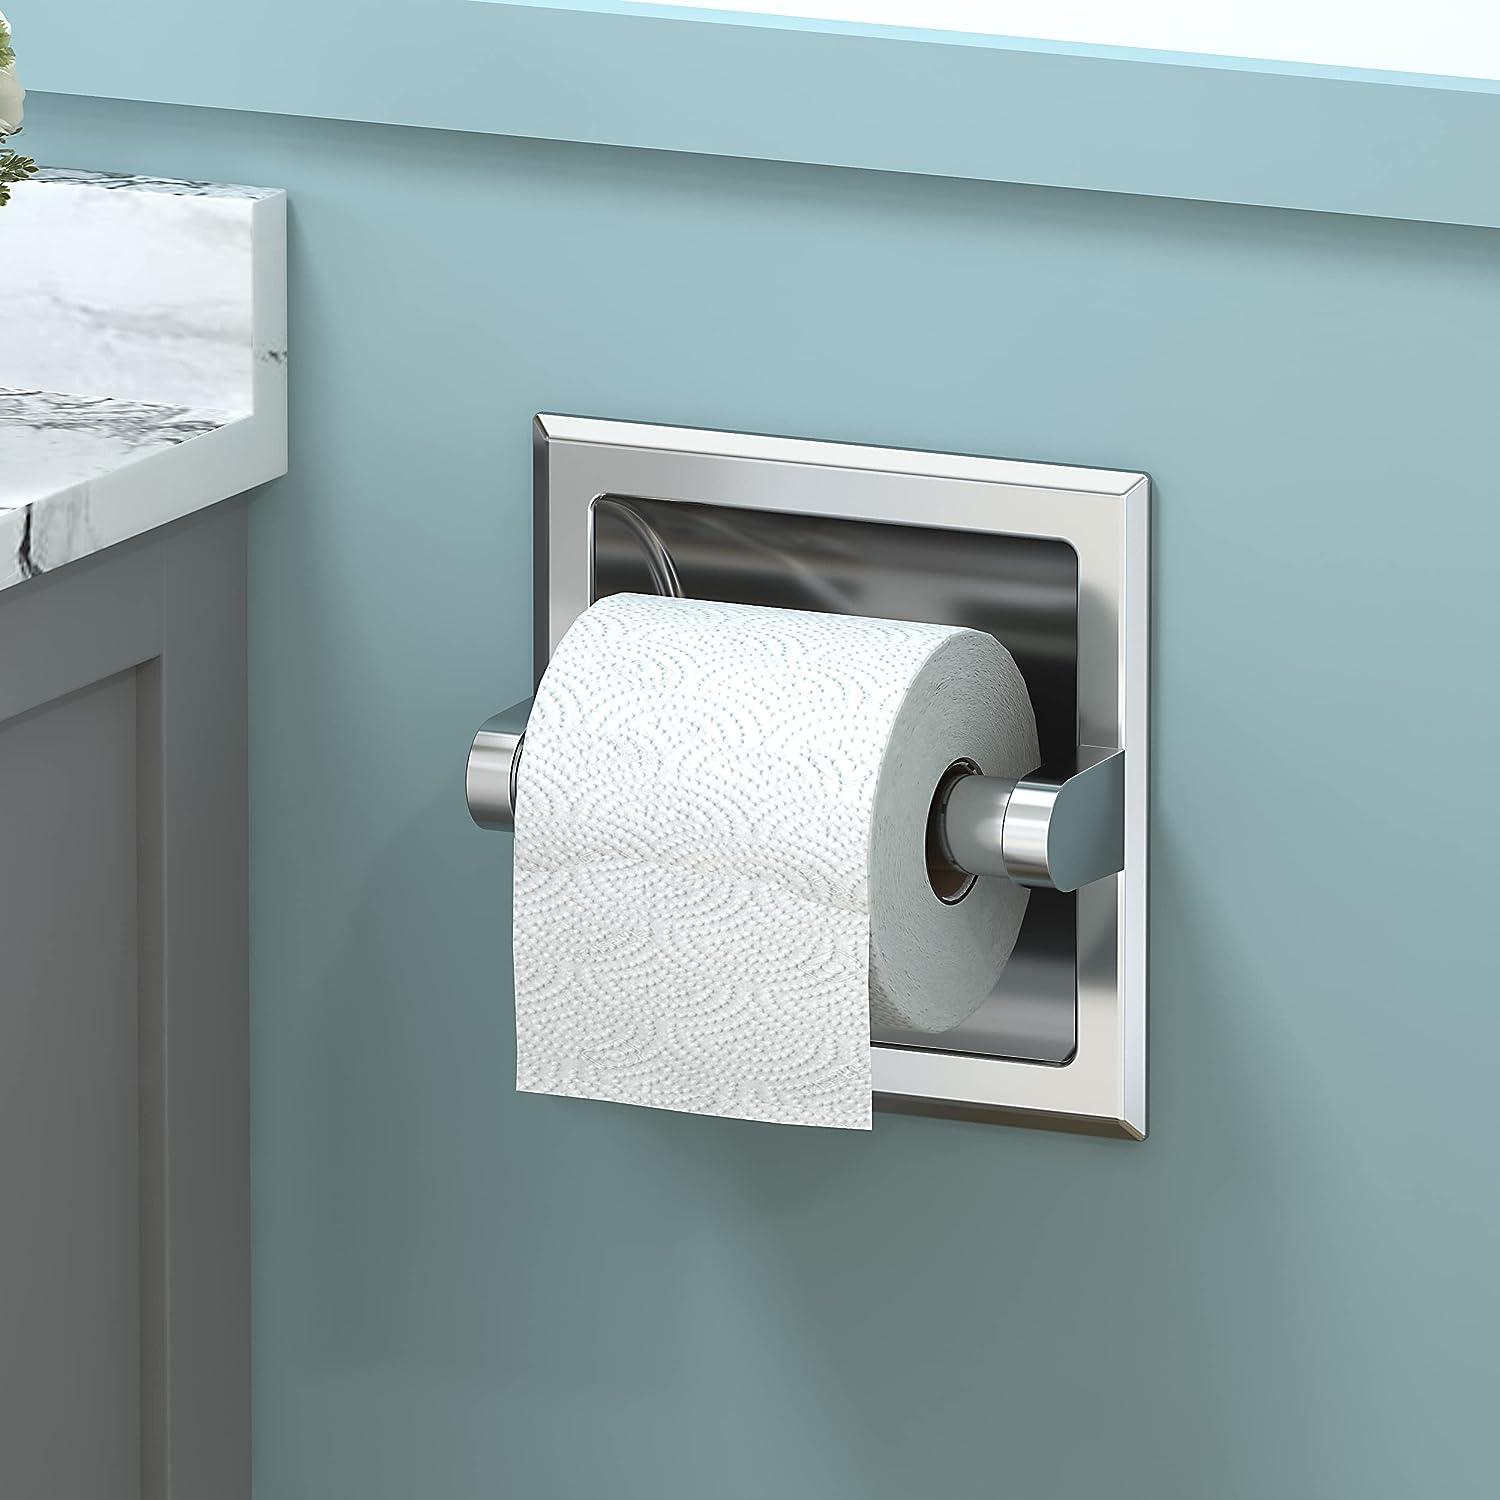 How To Remove Recessed Toilet Paper Holder